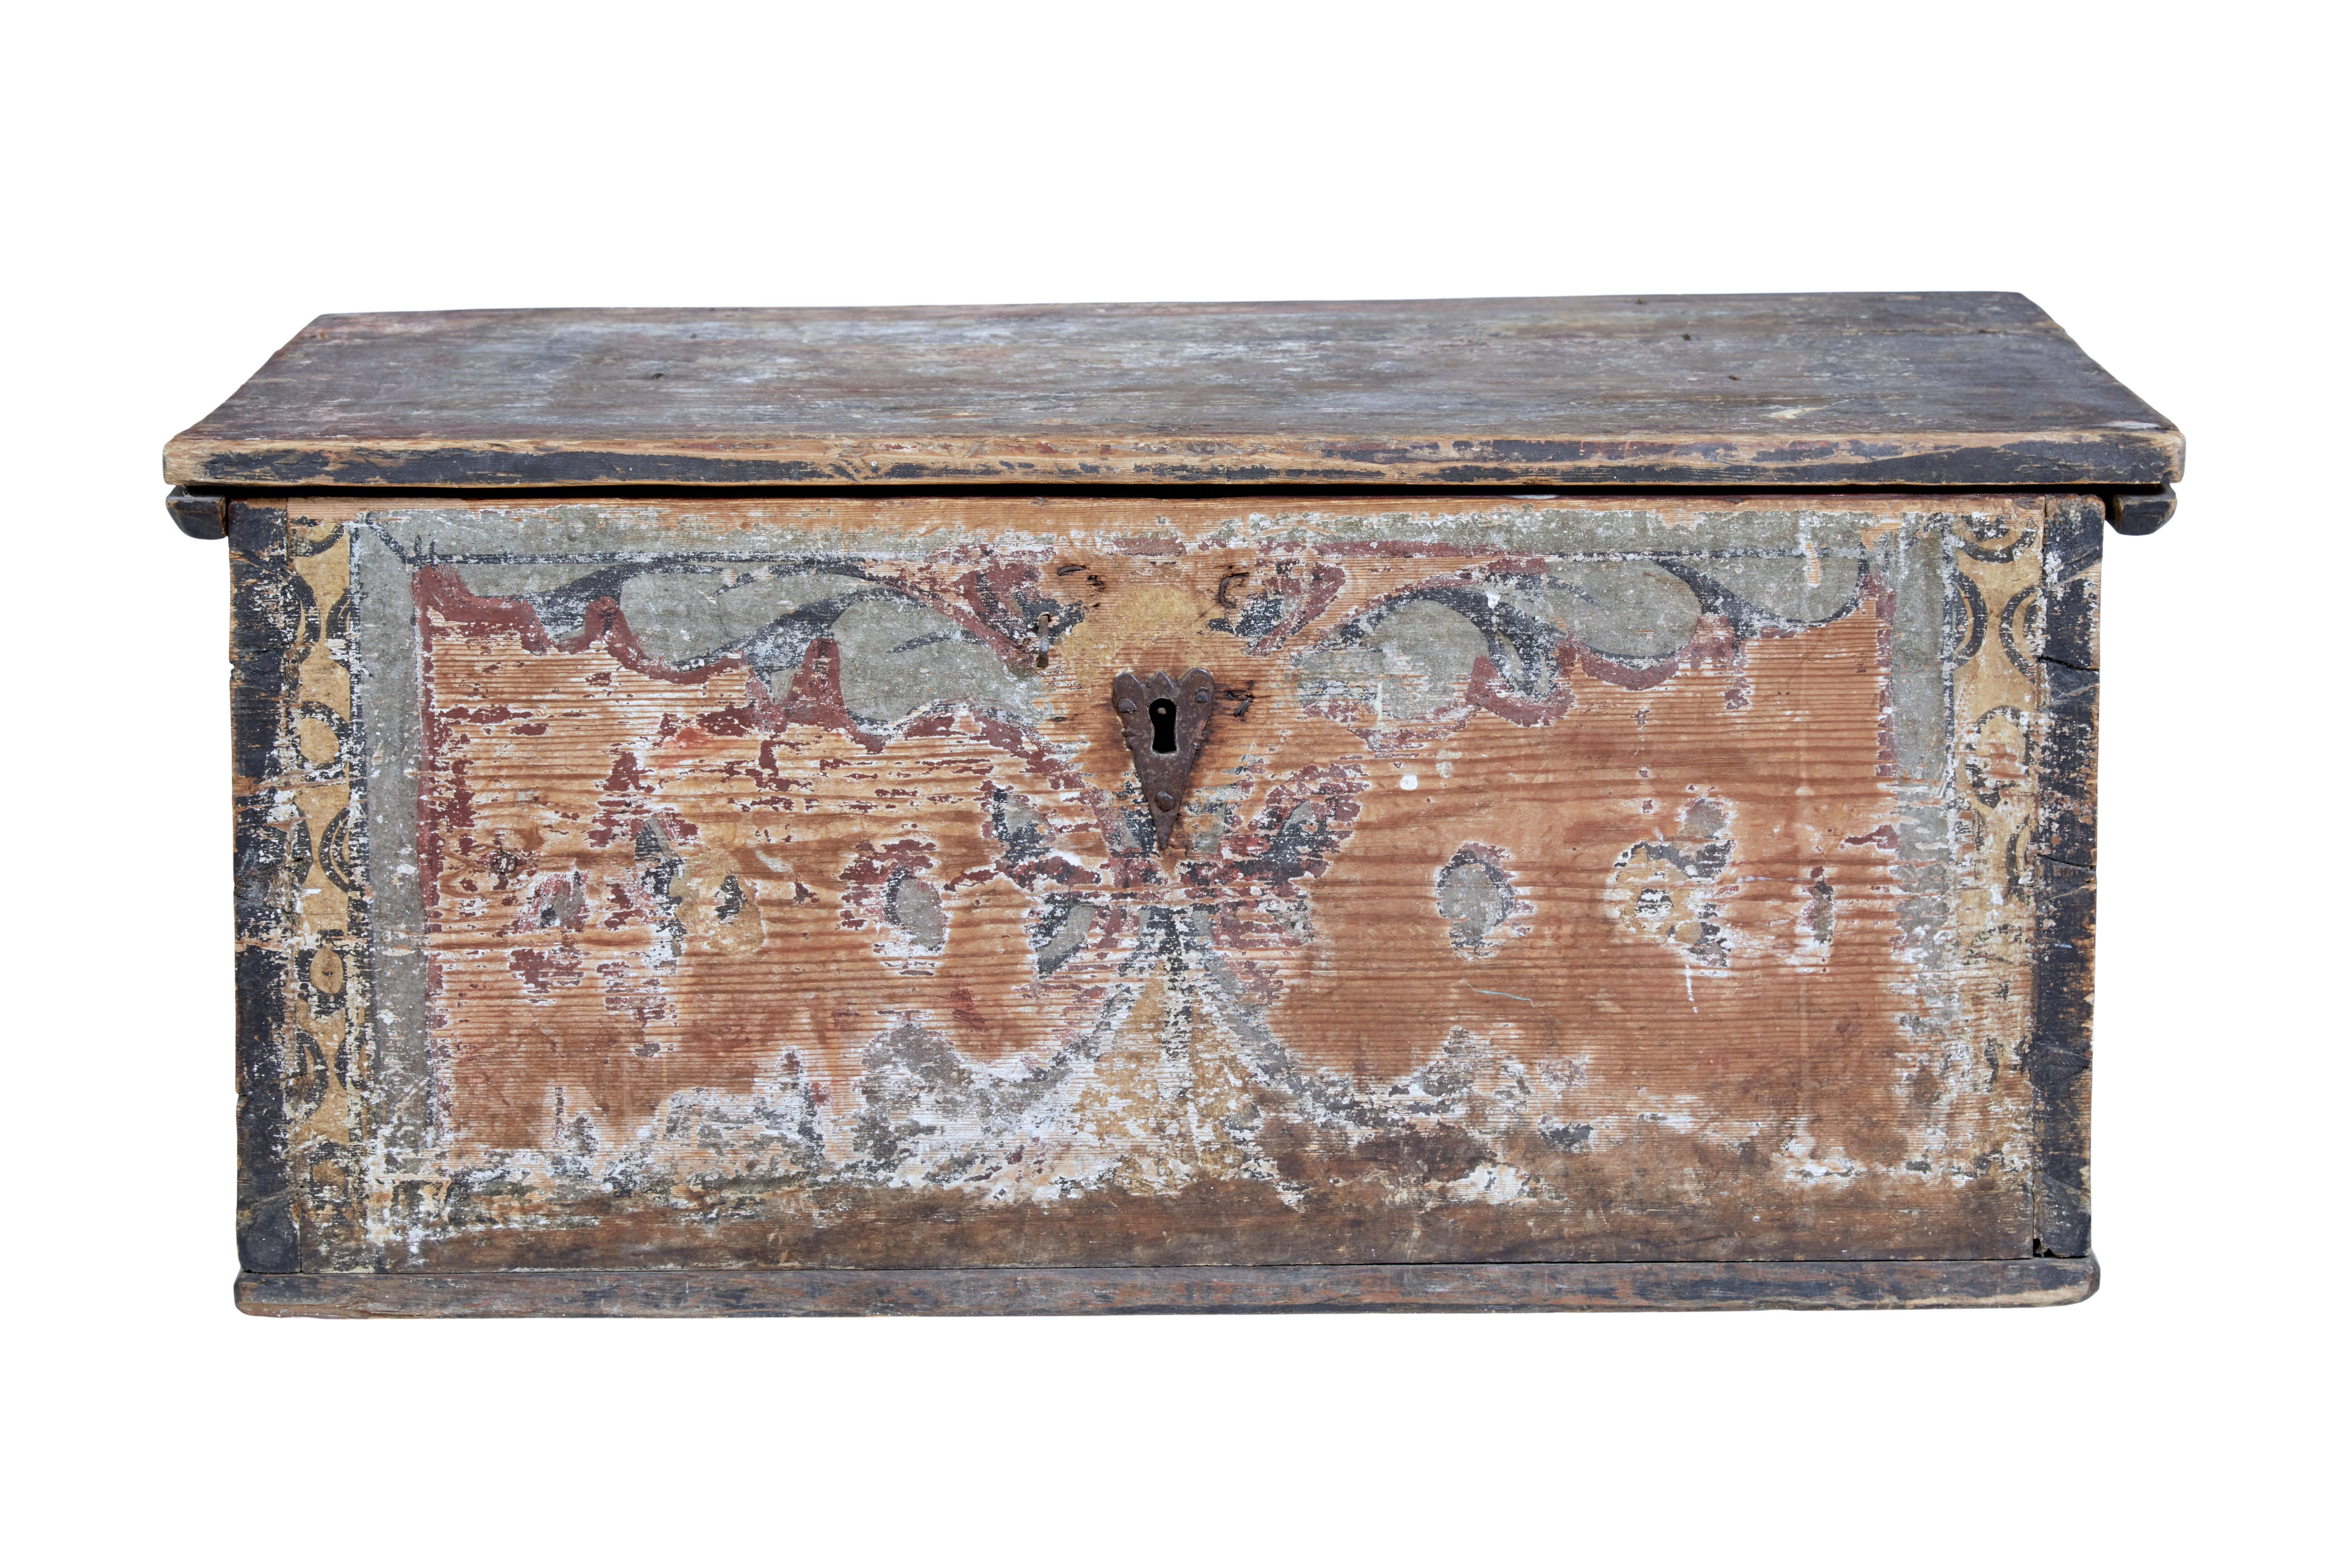 Early 19th century hand painted traditional Swedish chest/box circa 1800.

Stunning traditional Swedish box hand painted in the original paintwork. Decorated on all sides with swags in russet red/grey and yellow's. Complete with original hinges,